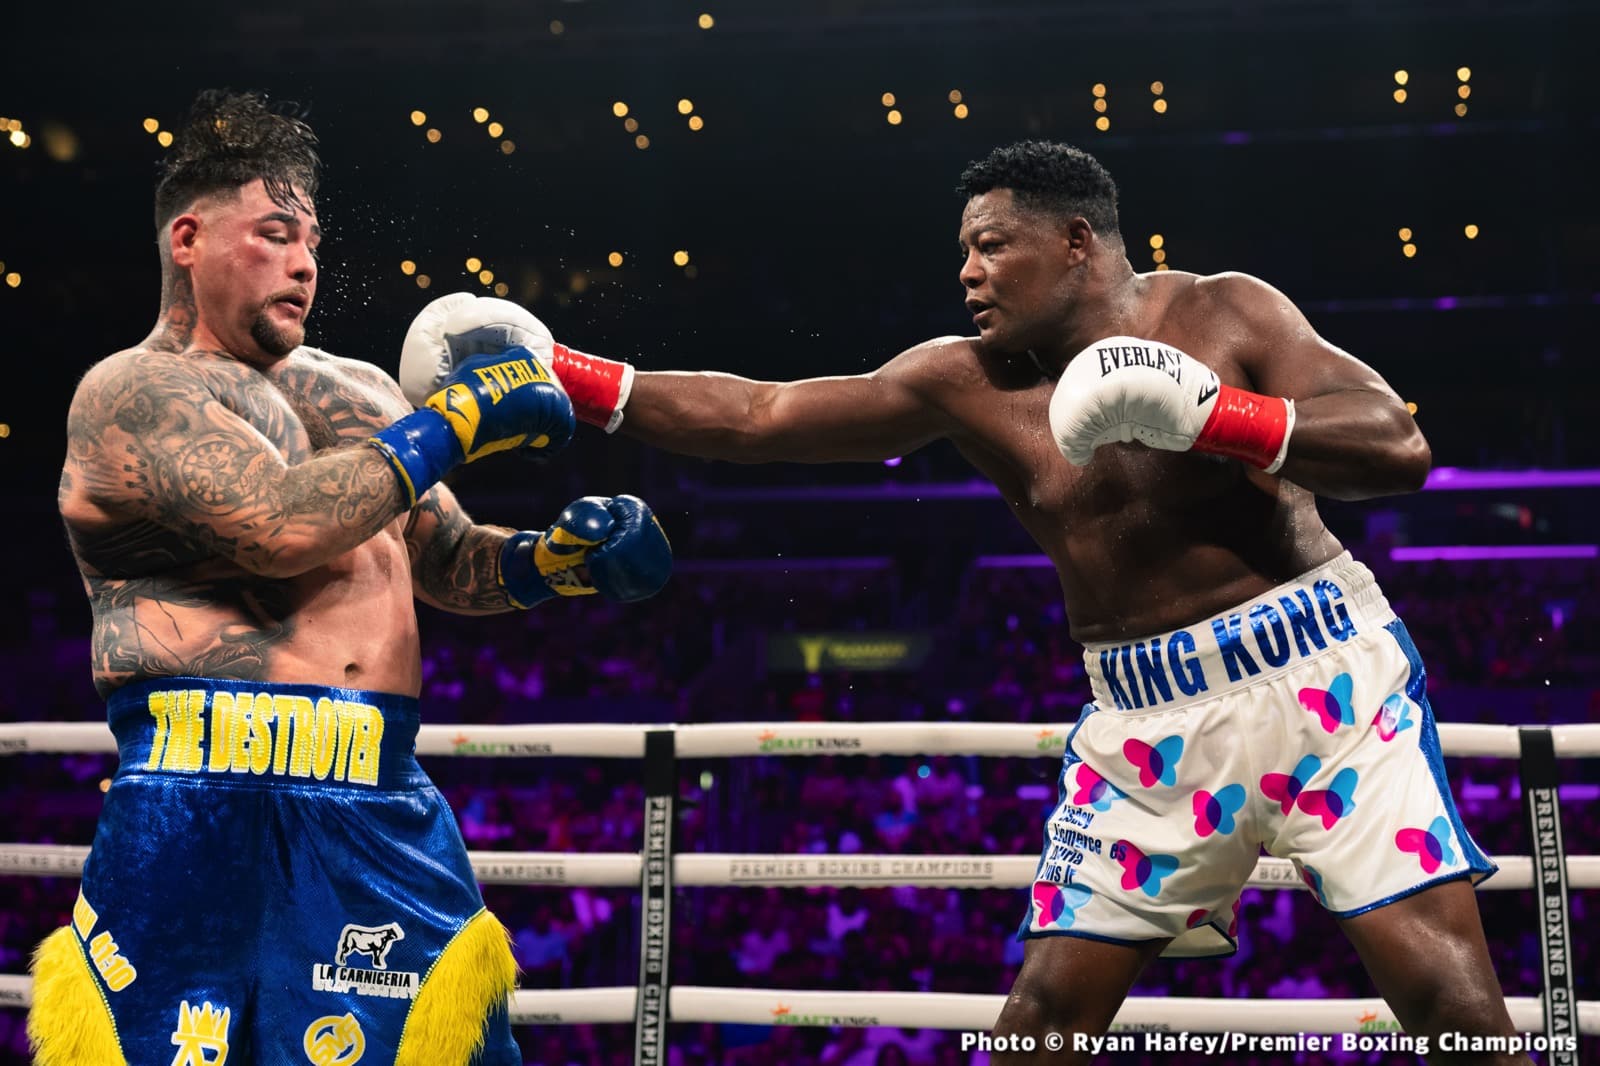 Image: Boxing Results: Andy “Destroyer” Ruiz Defeats Luis “King Kong” Ortiz!